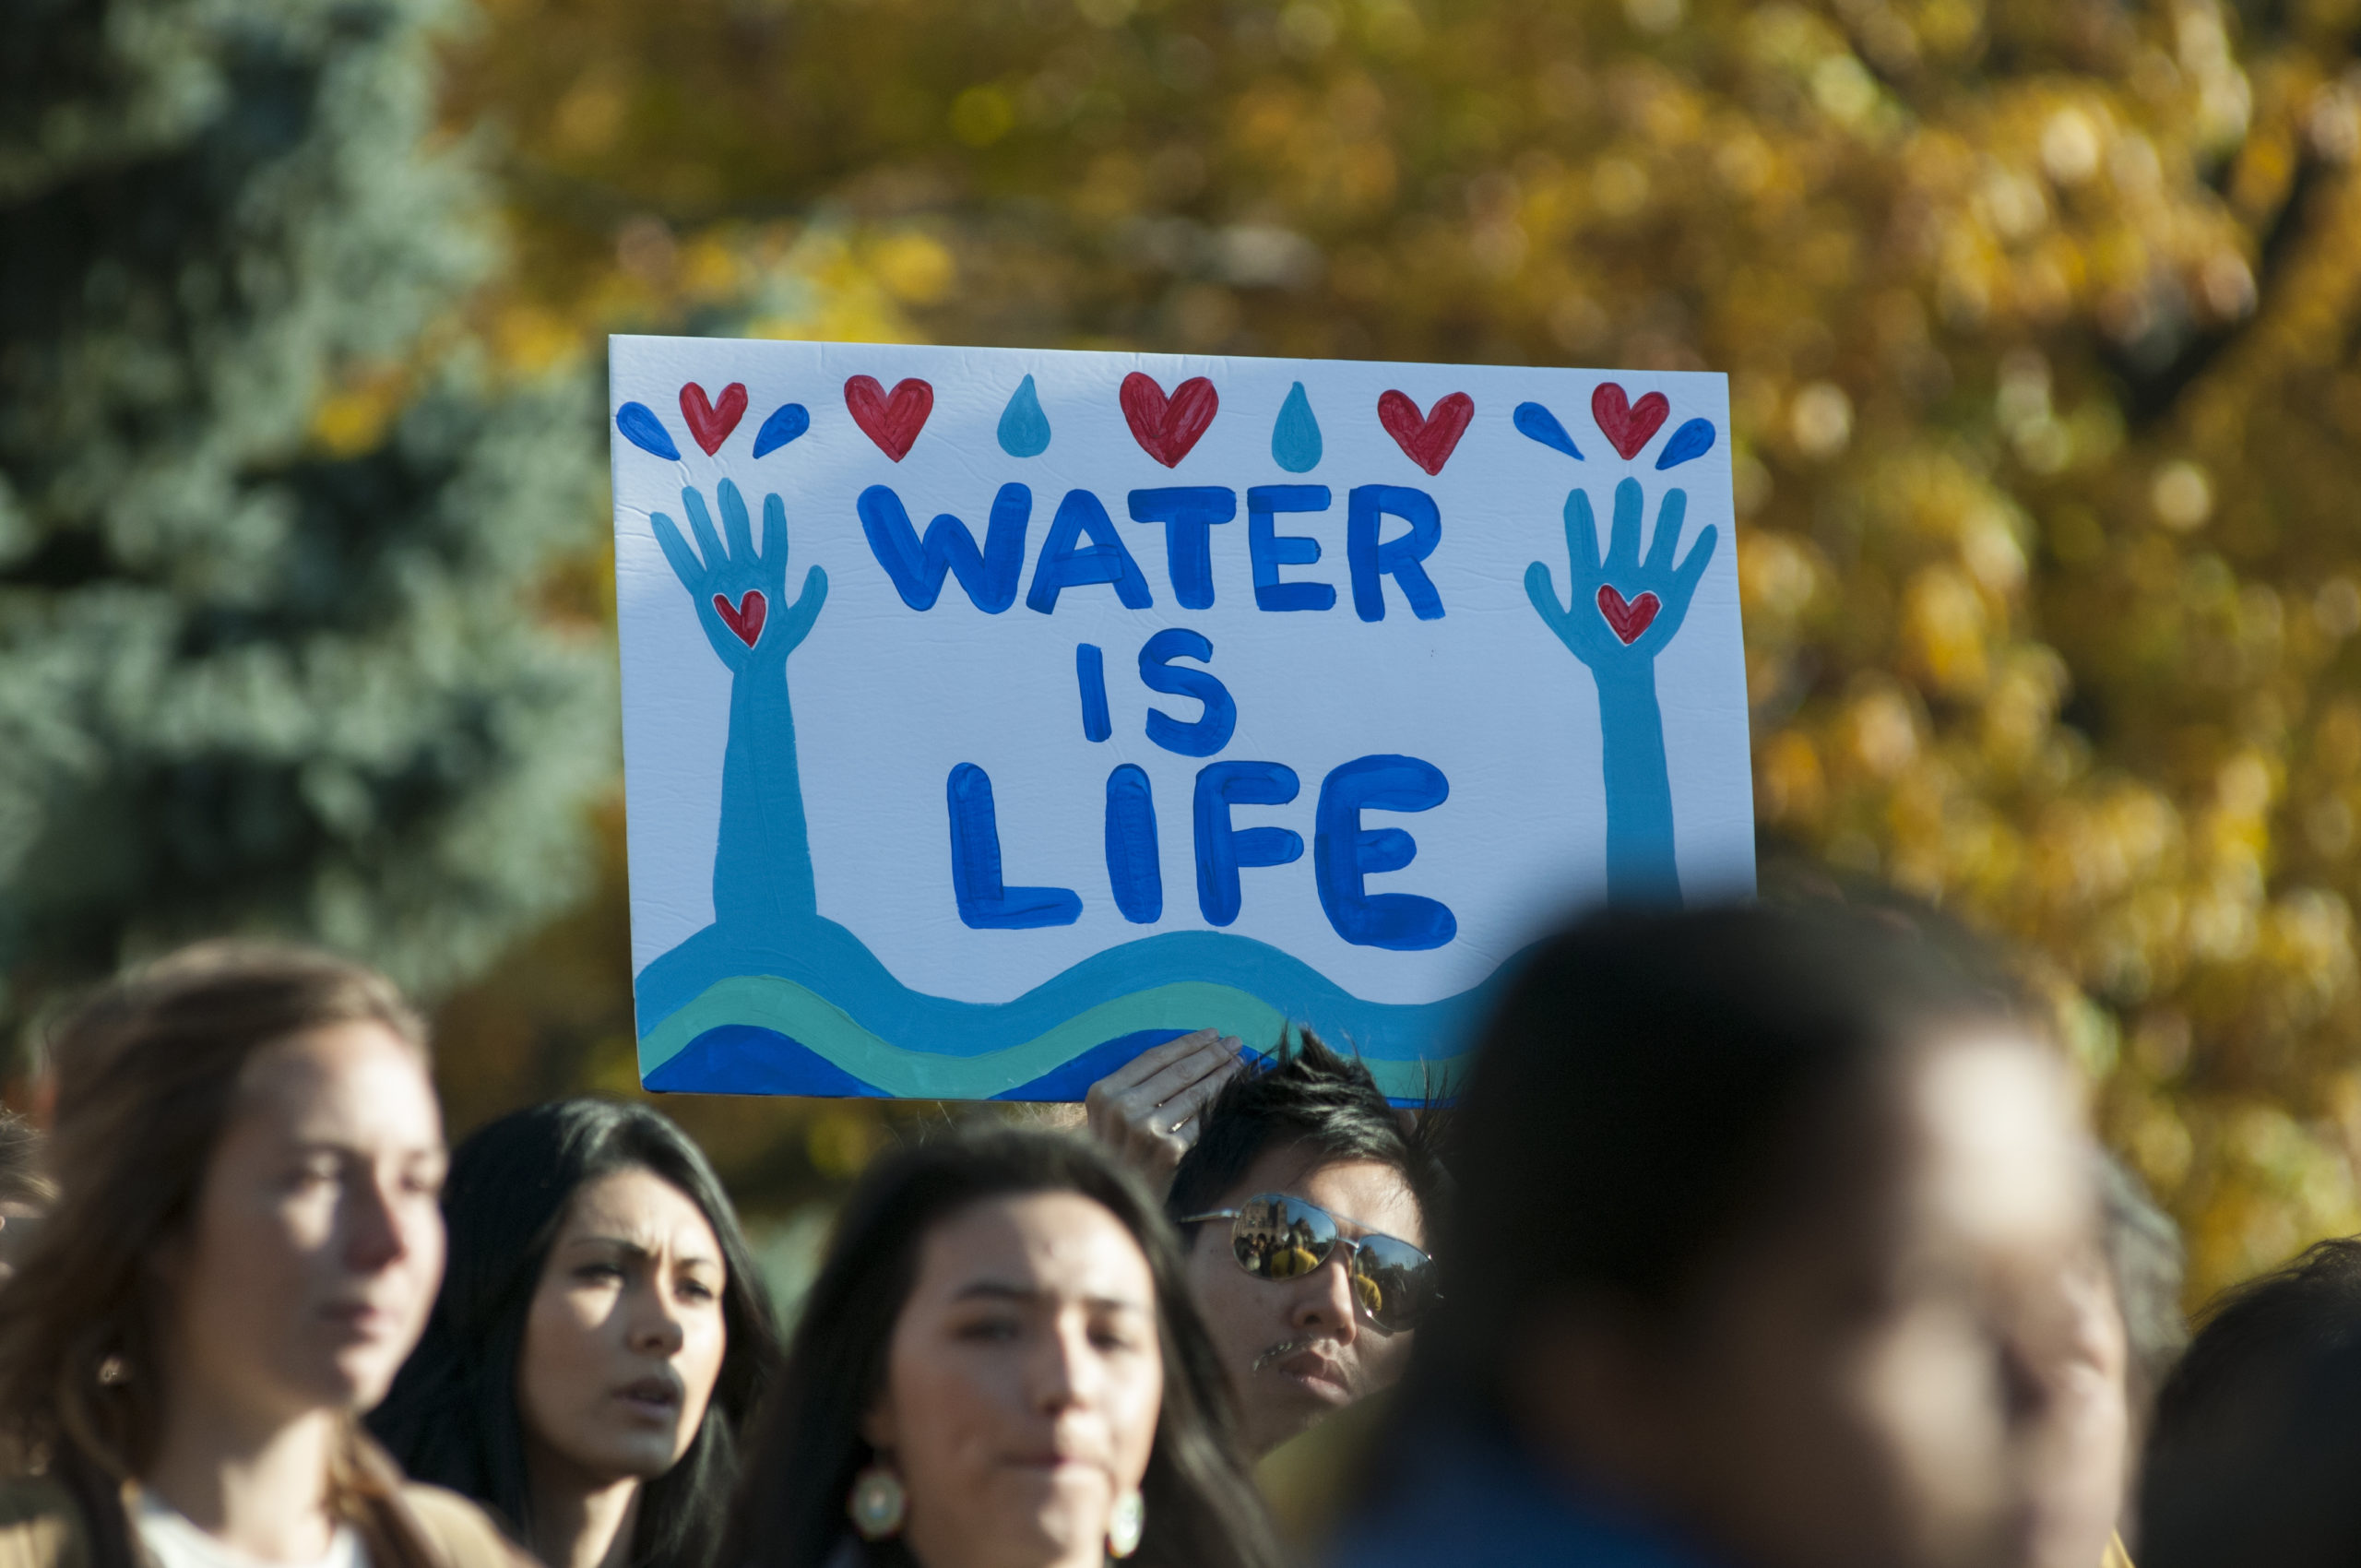 People holding a sign that says "Water Is Life." Photo by arindambanerjee